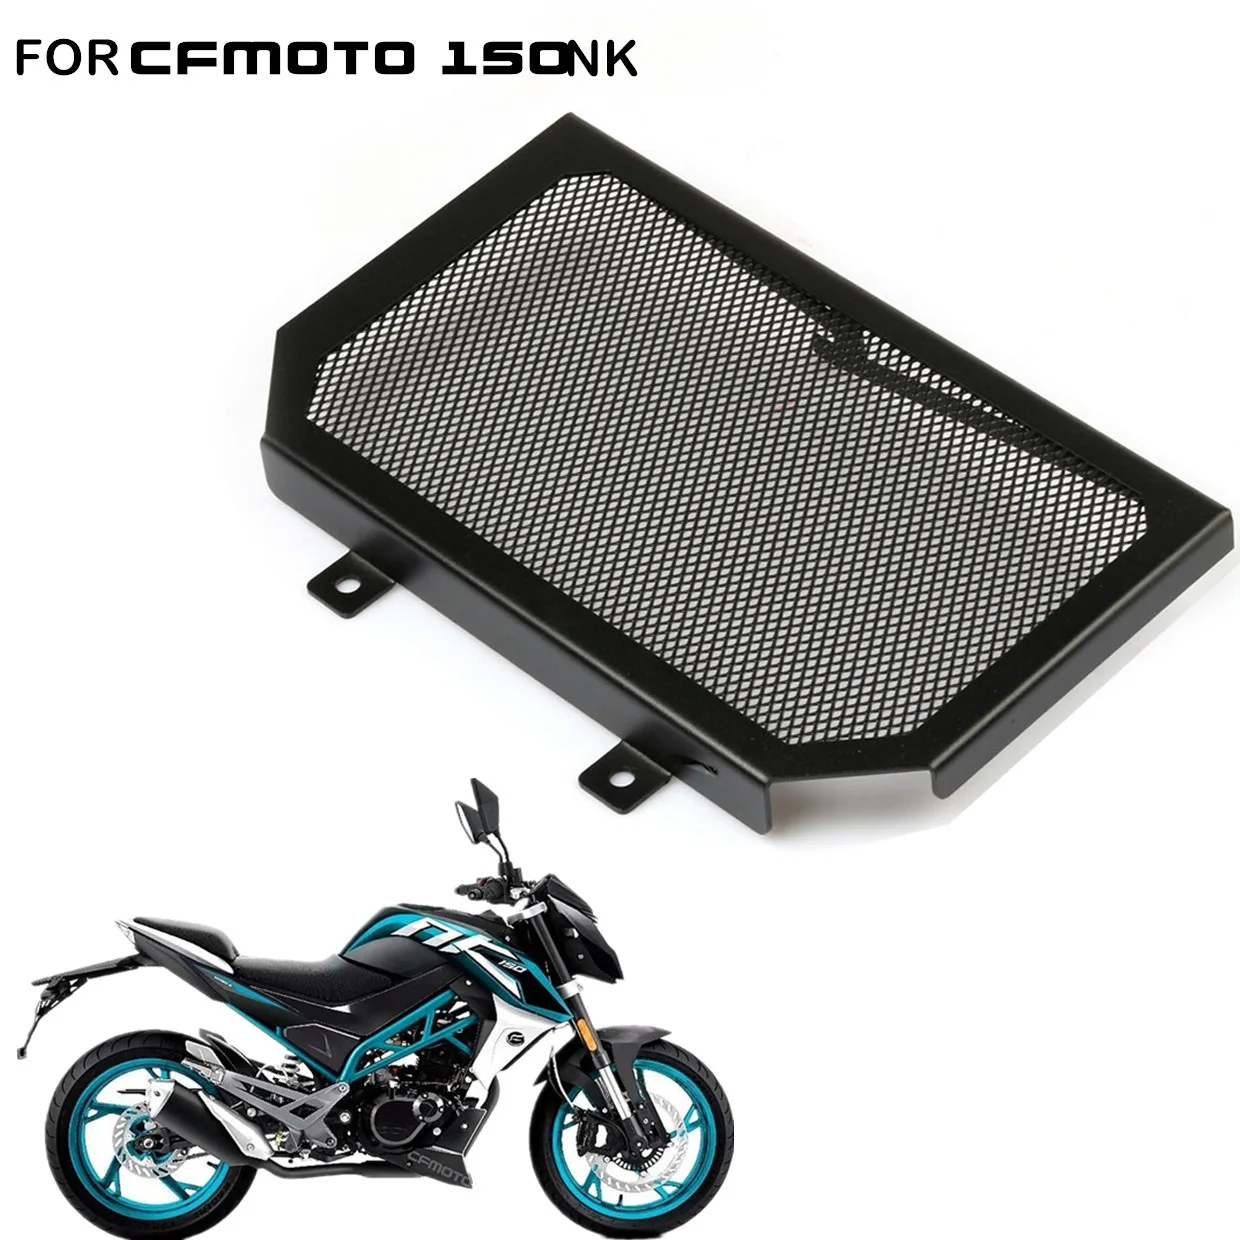 

Motorcycle Radiator Grille Guard Cover Protector Grill Protection For CFMOTO CF 150NK NK150 CF150-3 CF150NK CF CF150 NK 150 NK